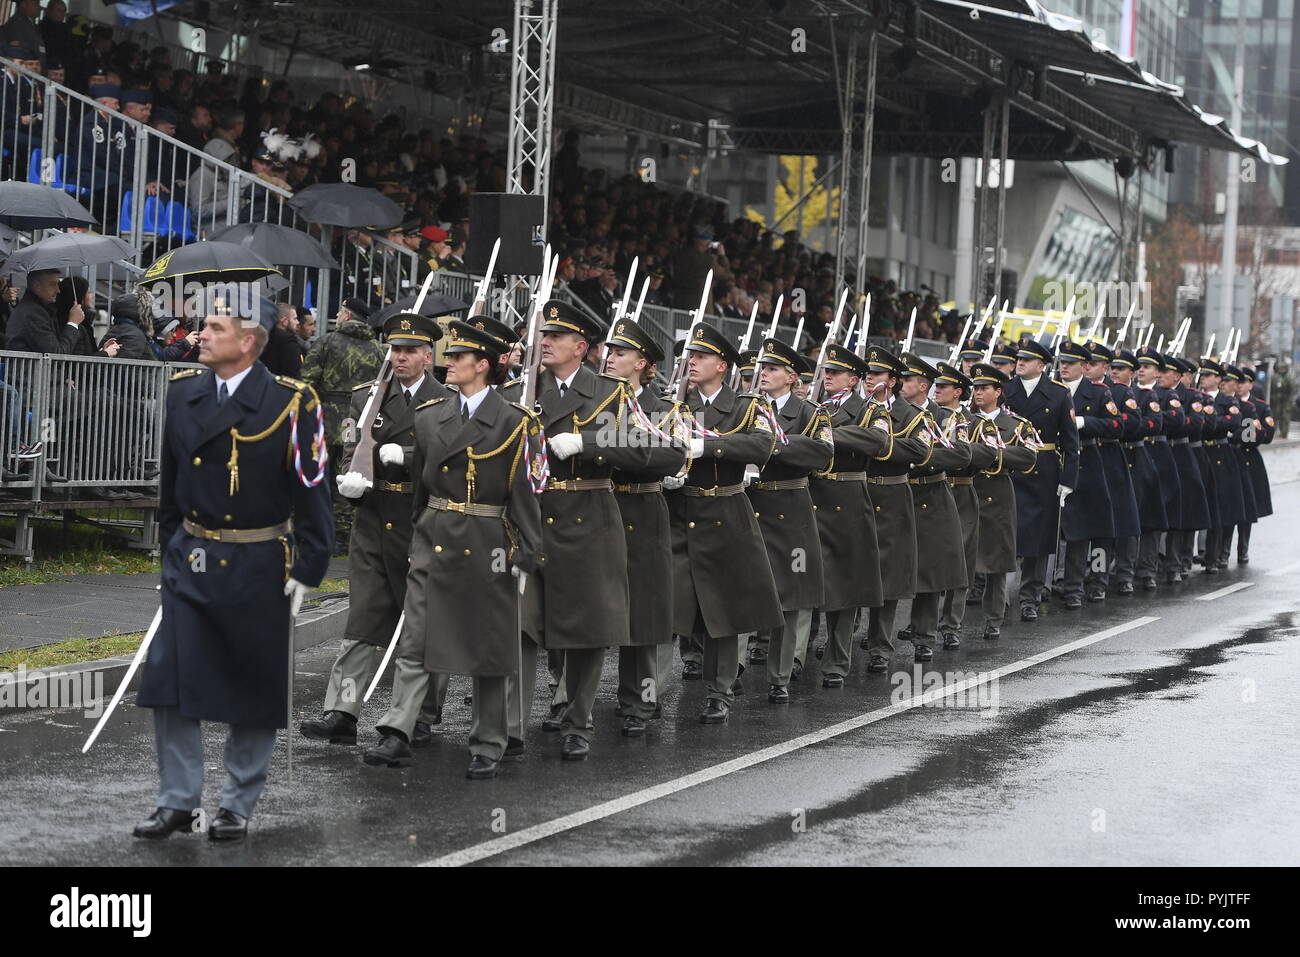 Military parade on the occasion of 100th anniversary of Czechoslovakia's establishment, attended by Czech President Milos Zeman and U.S. Secretary of Defence James Mattis, took place on the European Street in Prague, Czech Republic, on October 28, 2018. (CTK Photo/Ondrej Deml) Stock Photo